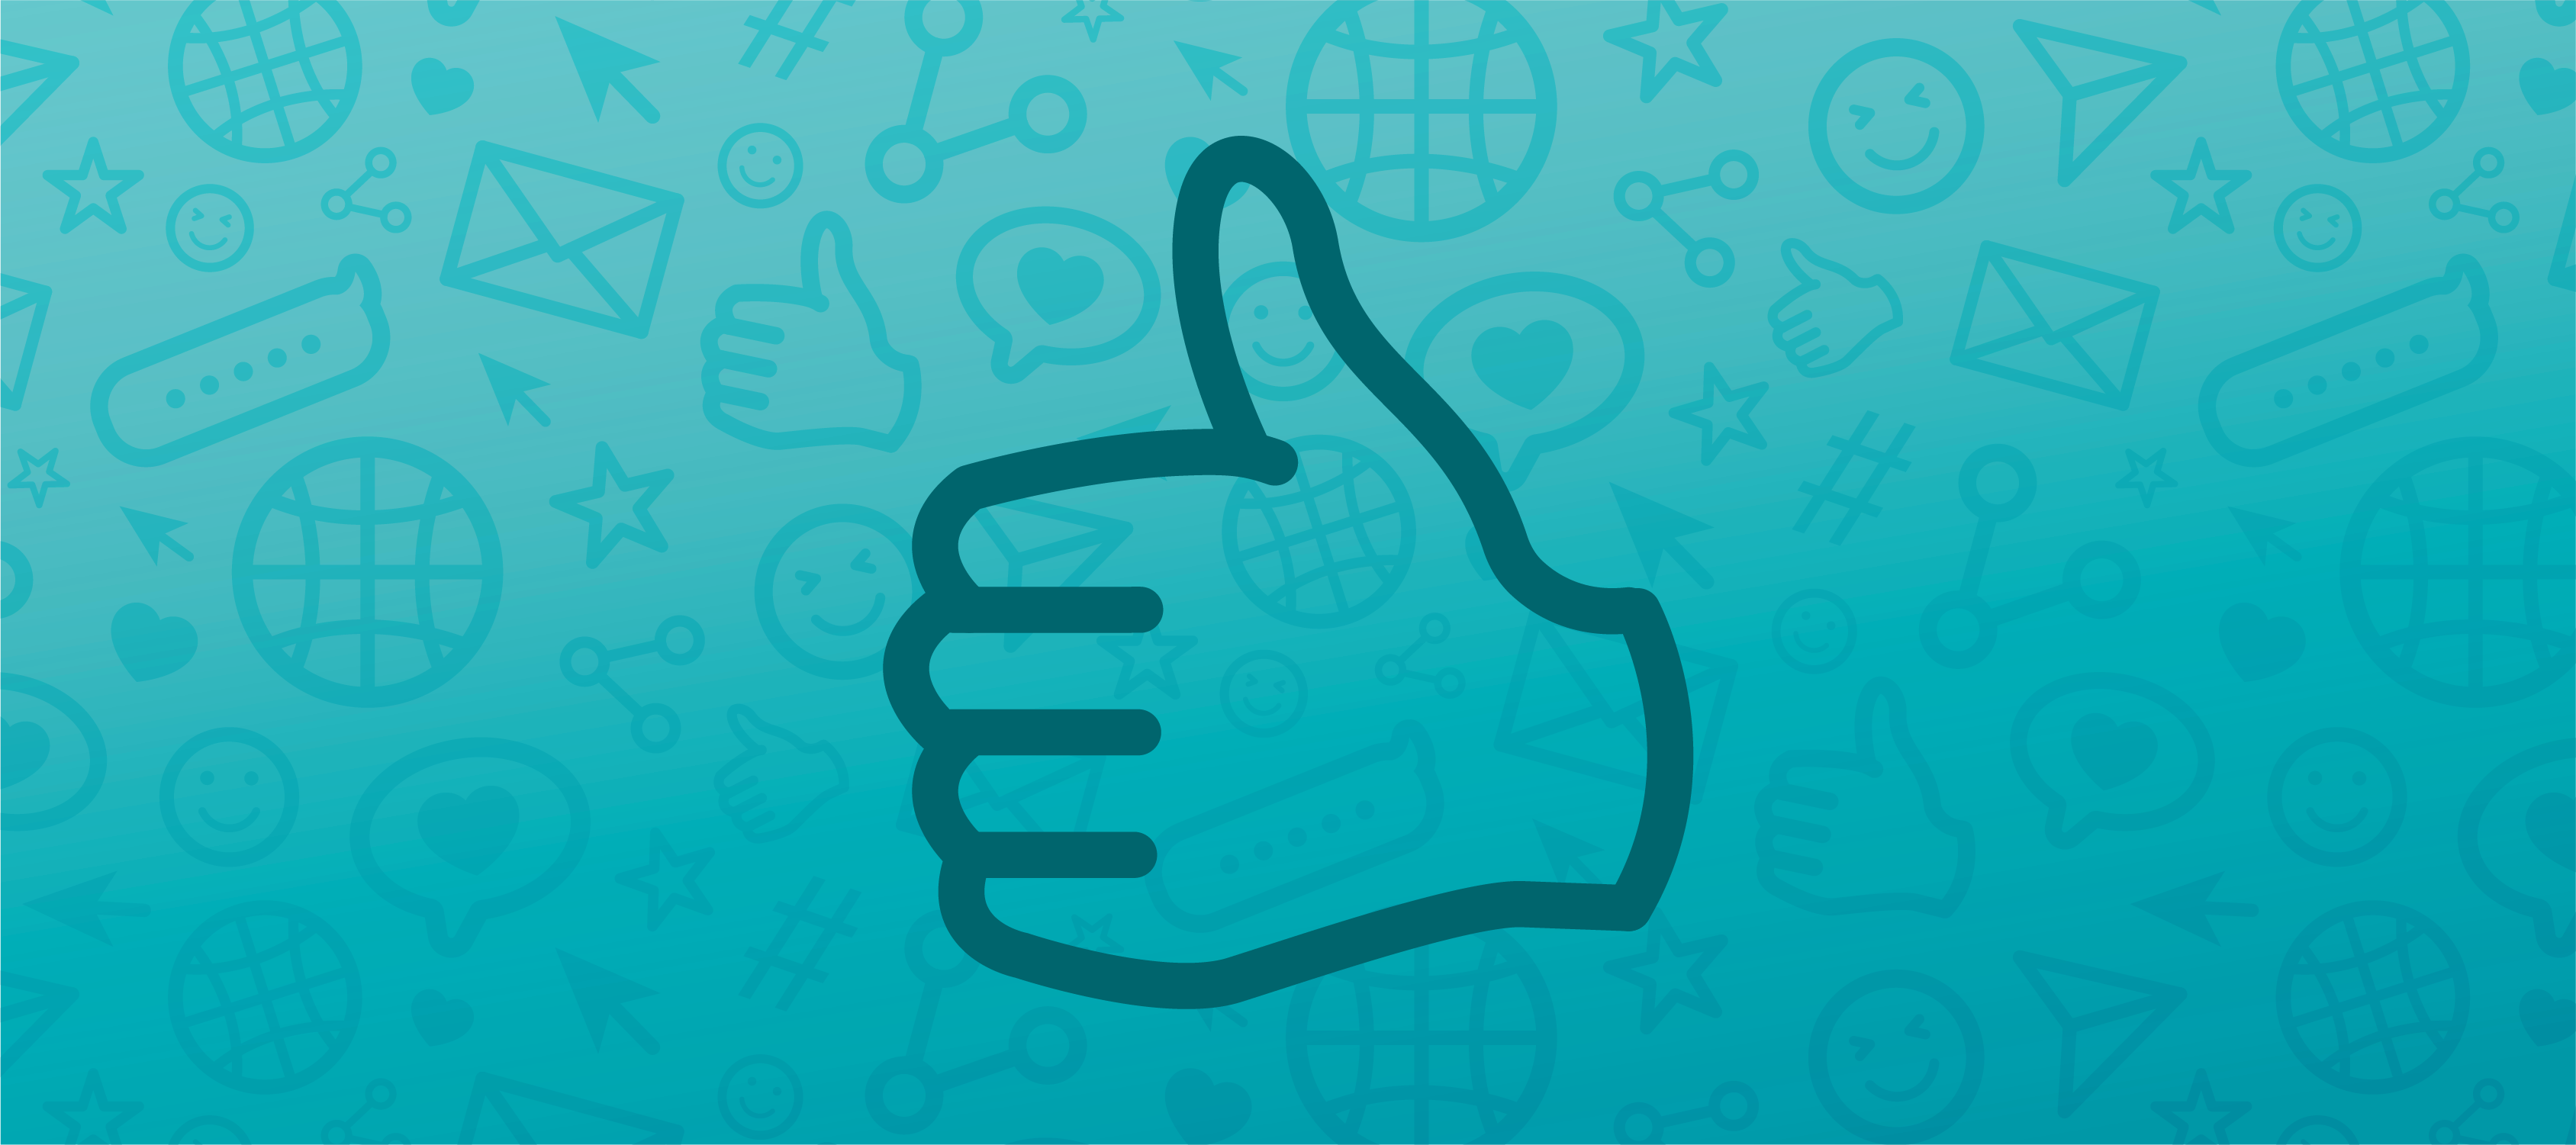 A blue header image featuring an icon of a thumbs up in the center and faded social icons in the background